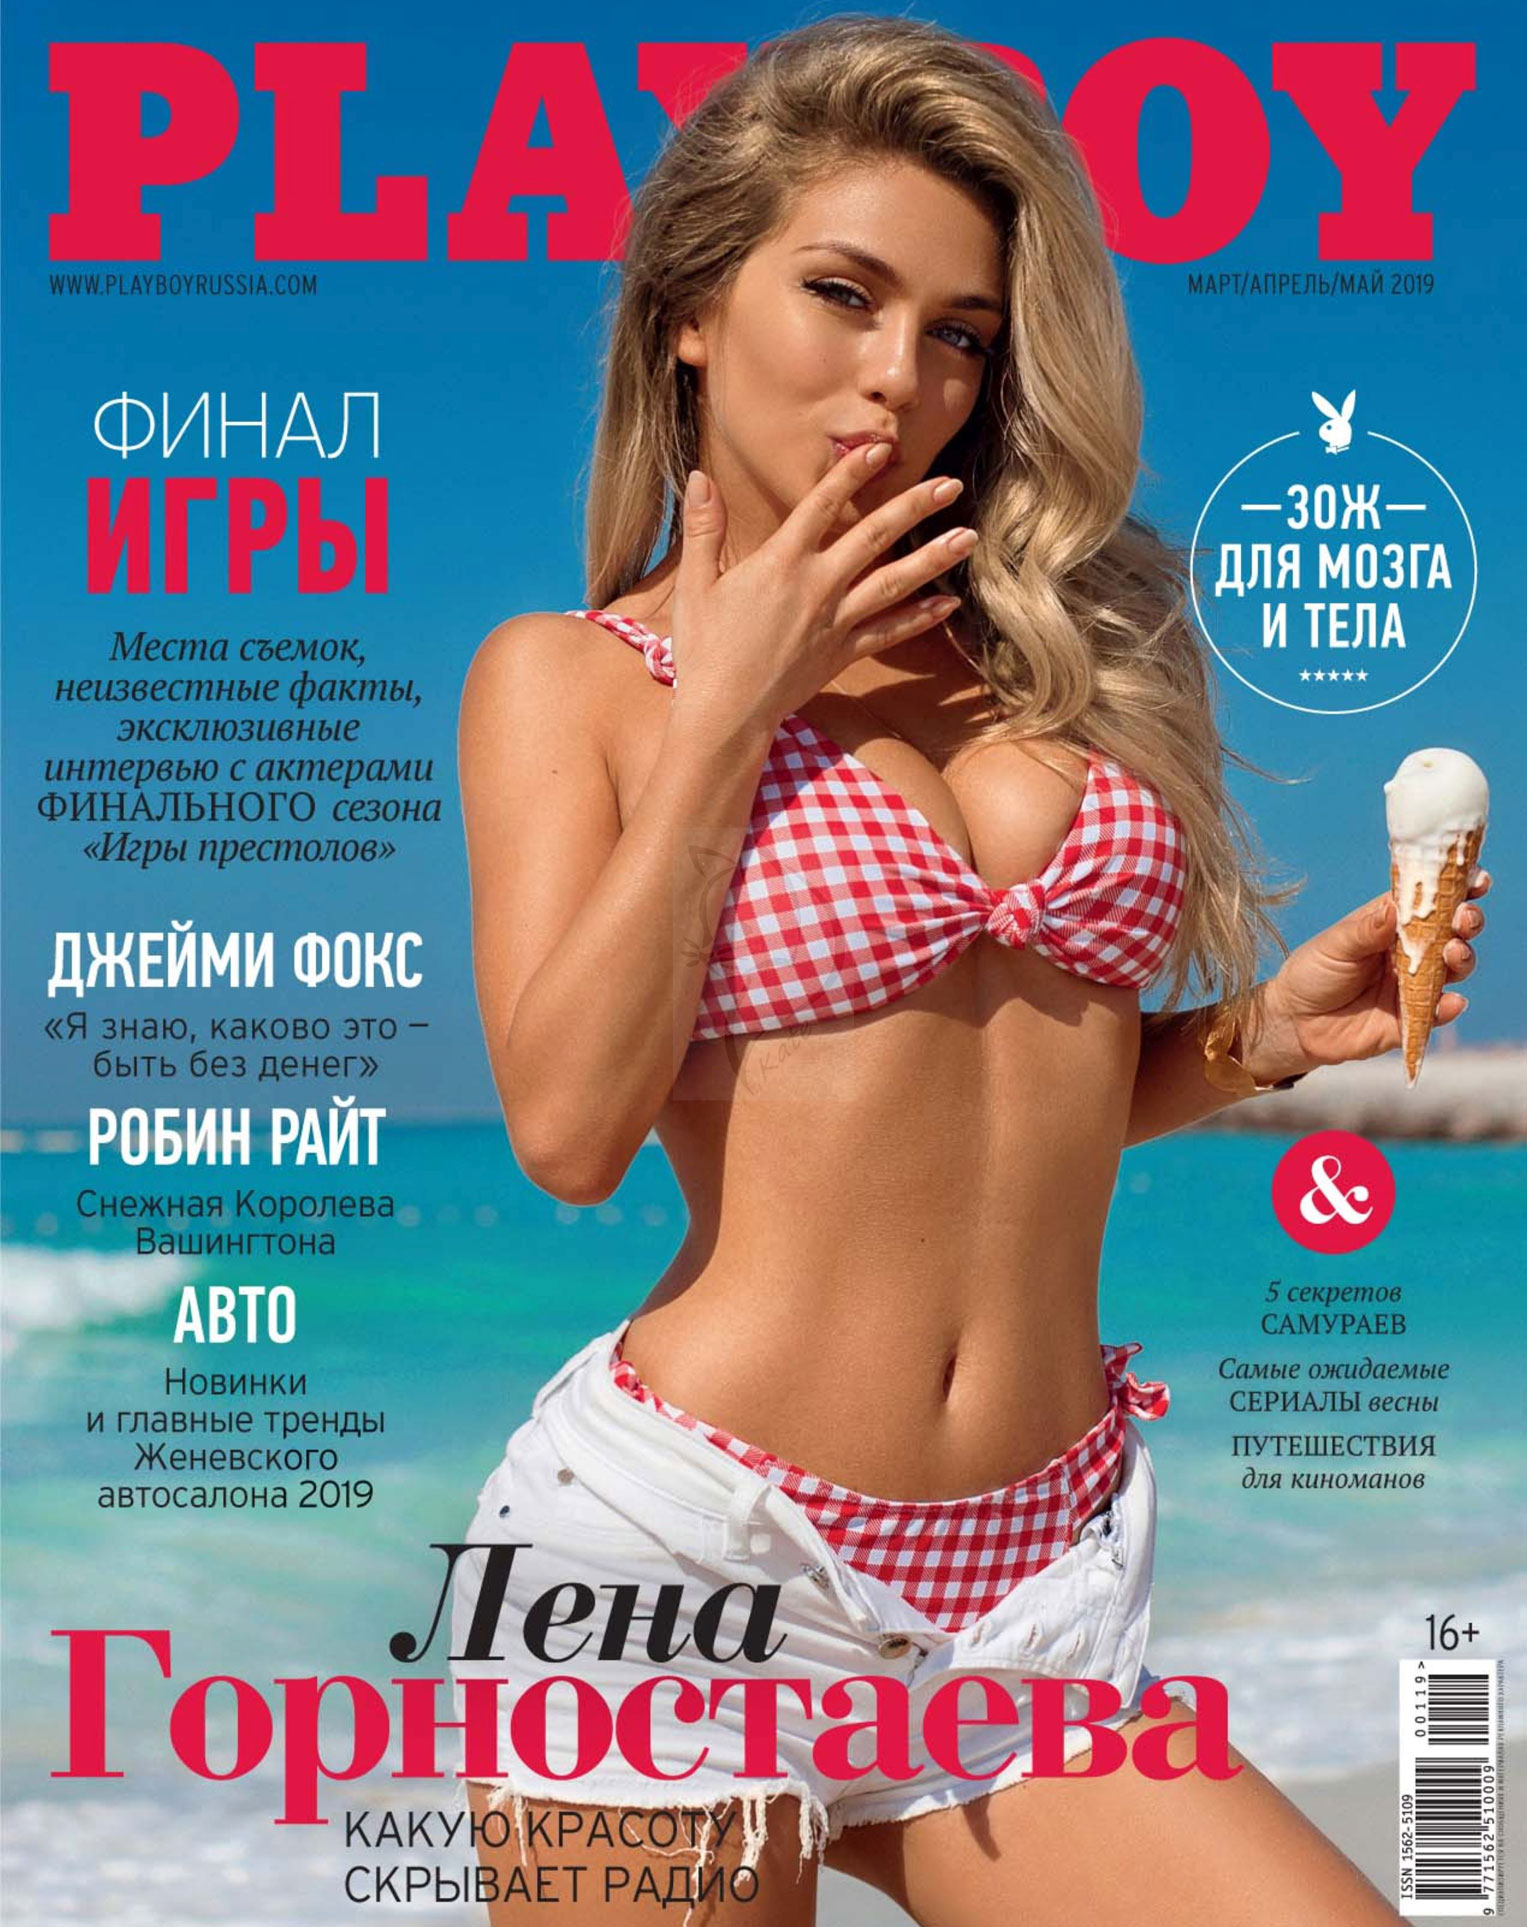 Oct 2021 Playboy Cover